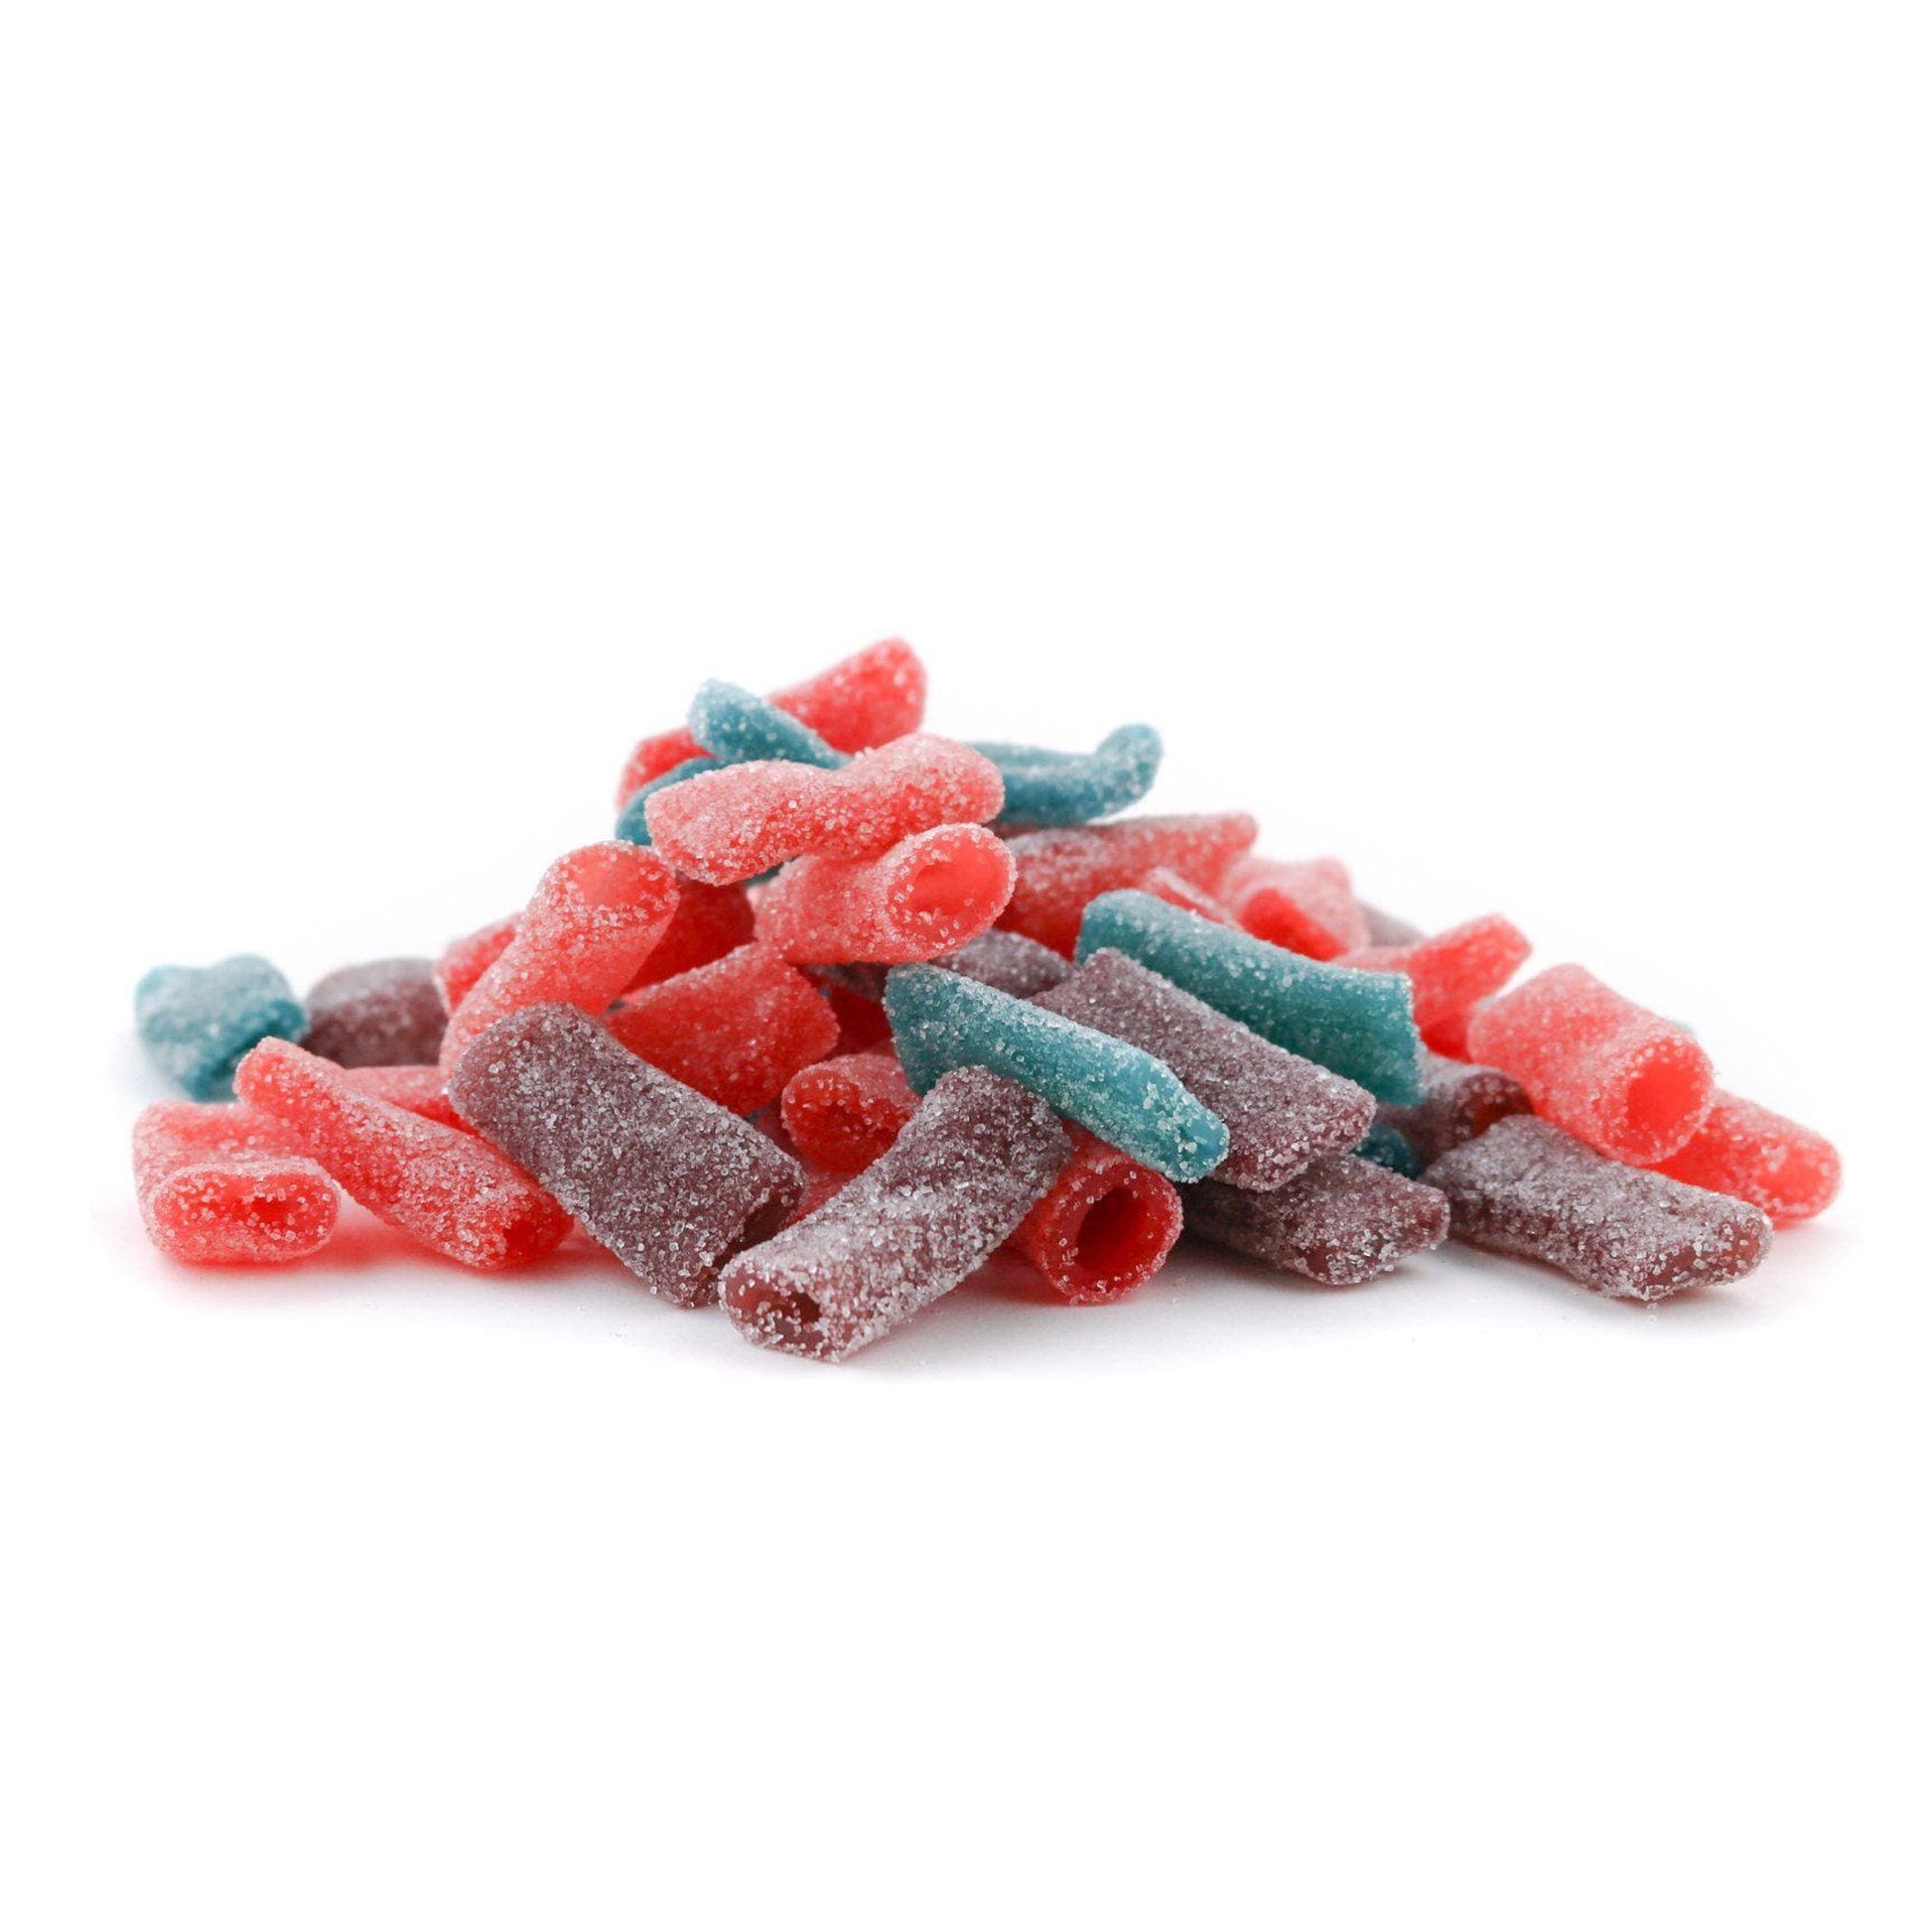 Sour Punch Sweet Bites Raw Colorful Candy - Not So Sour Punch Sweet Bites - Chewy Sweets - Cotton Candy Flavored Candy